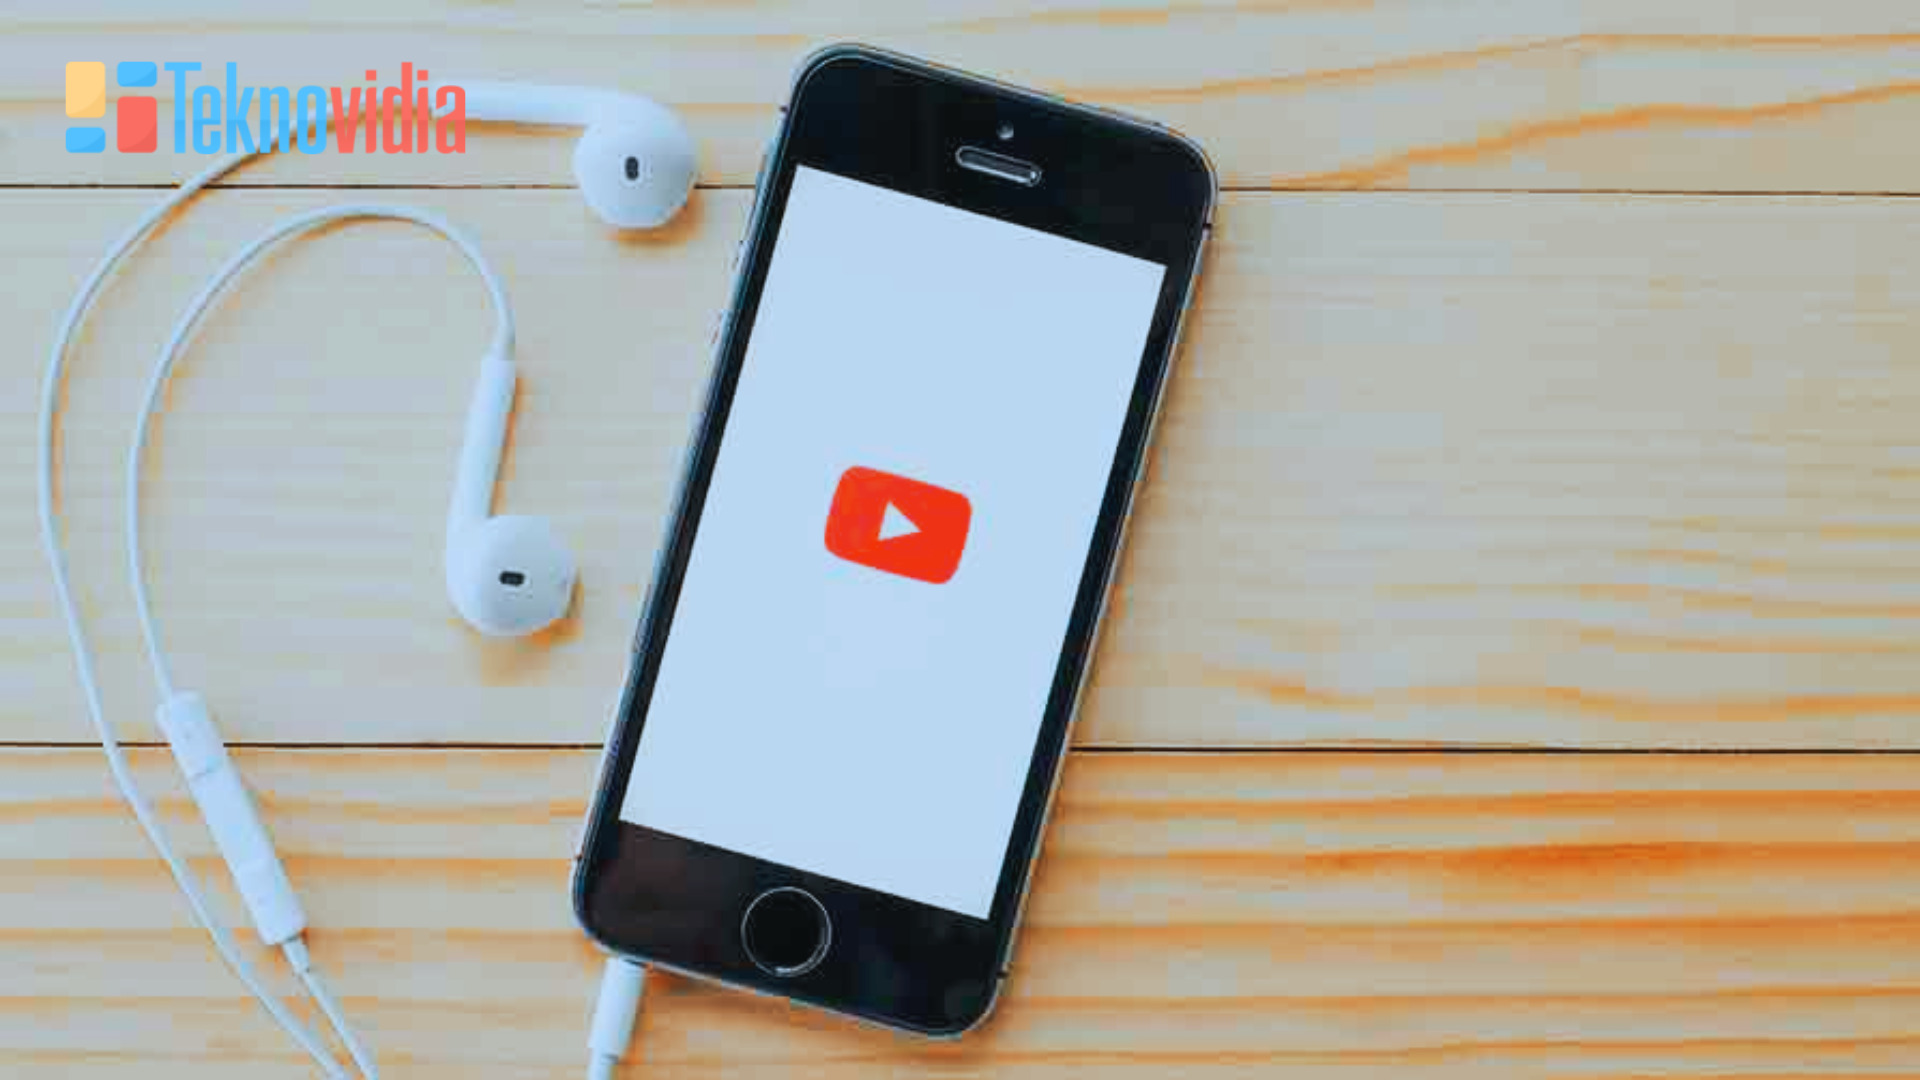 channel youtube tentang gadget